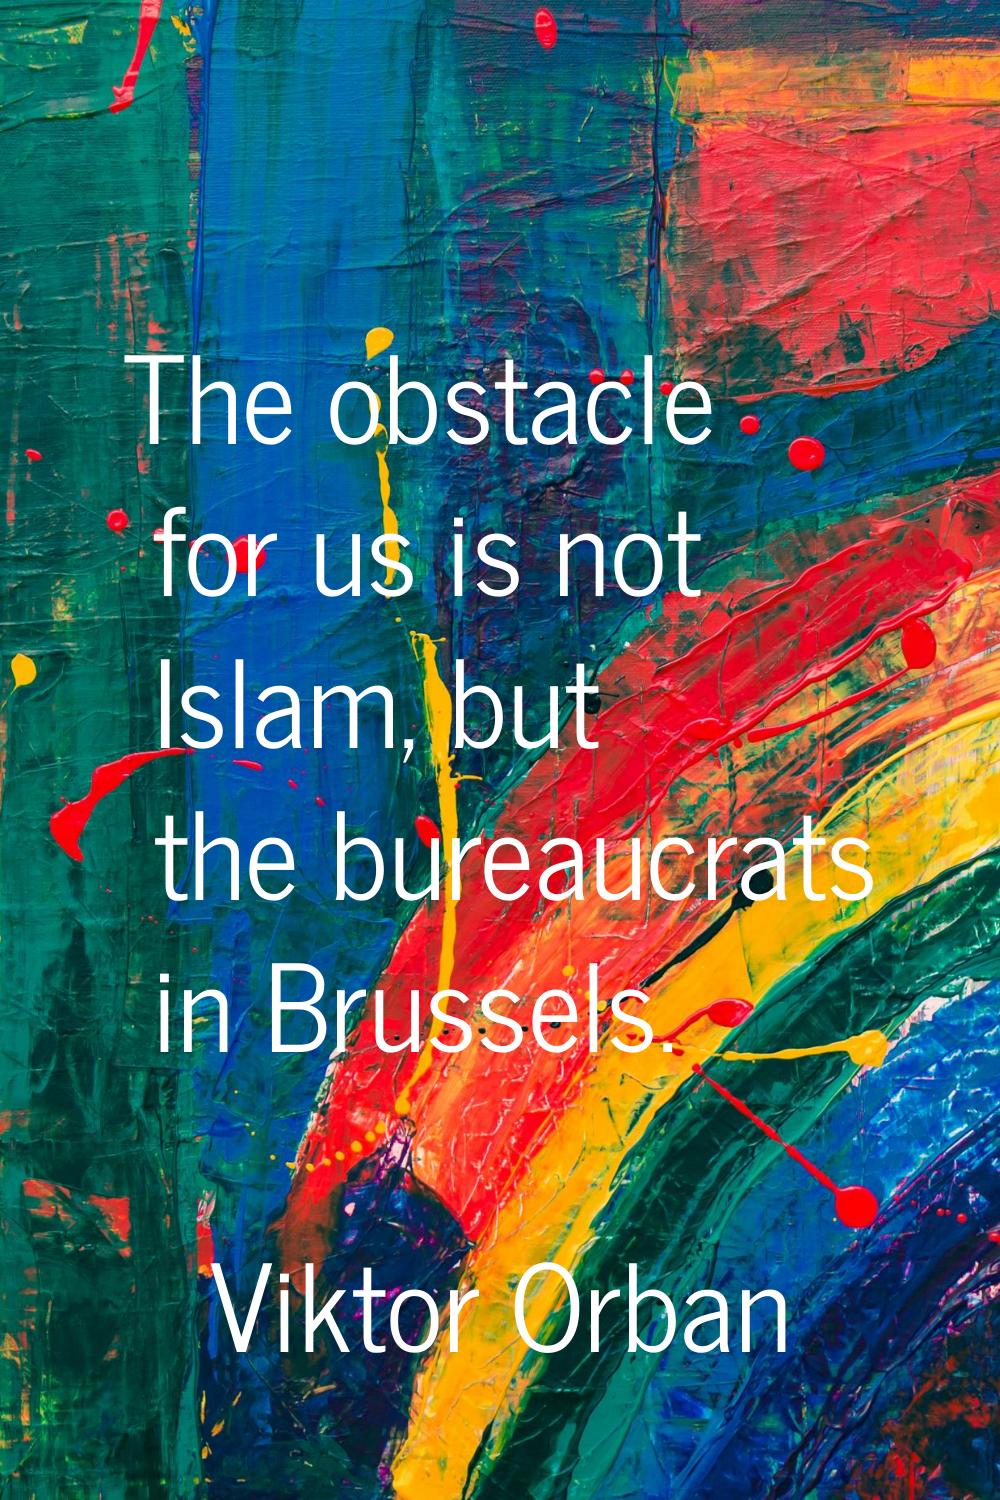 The obstacle for us is not Islam, but the bureaucrats in Brussels.